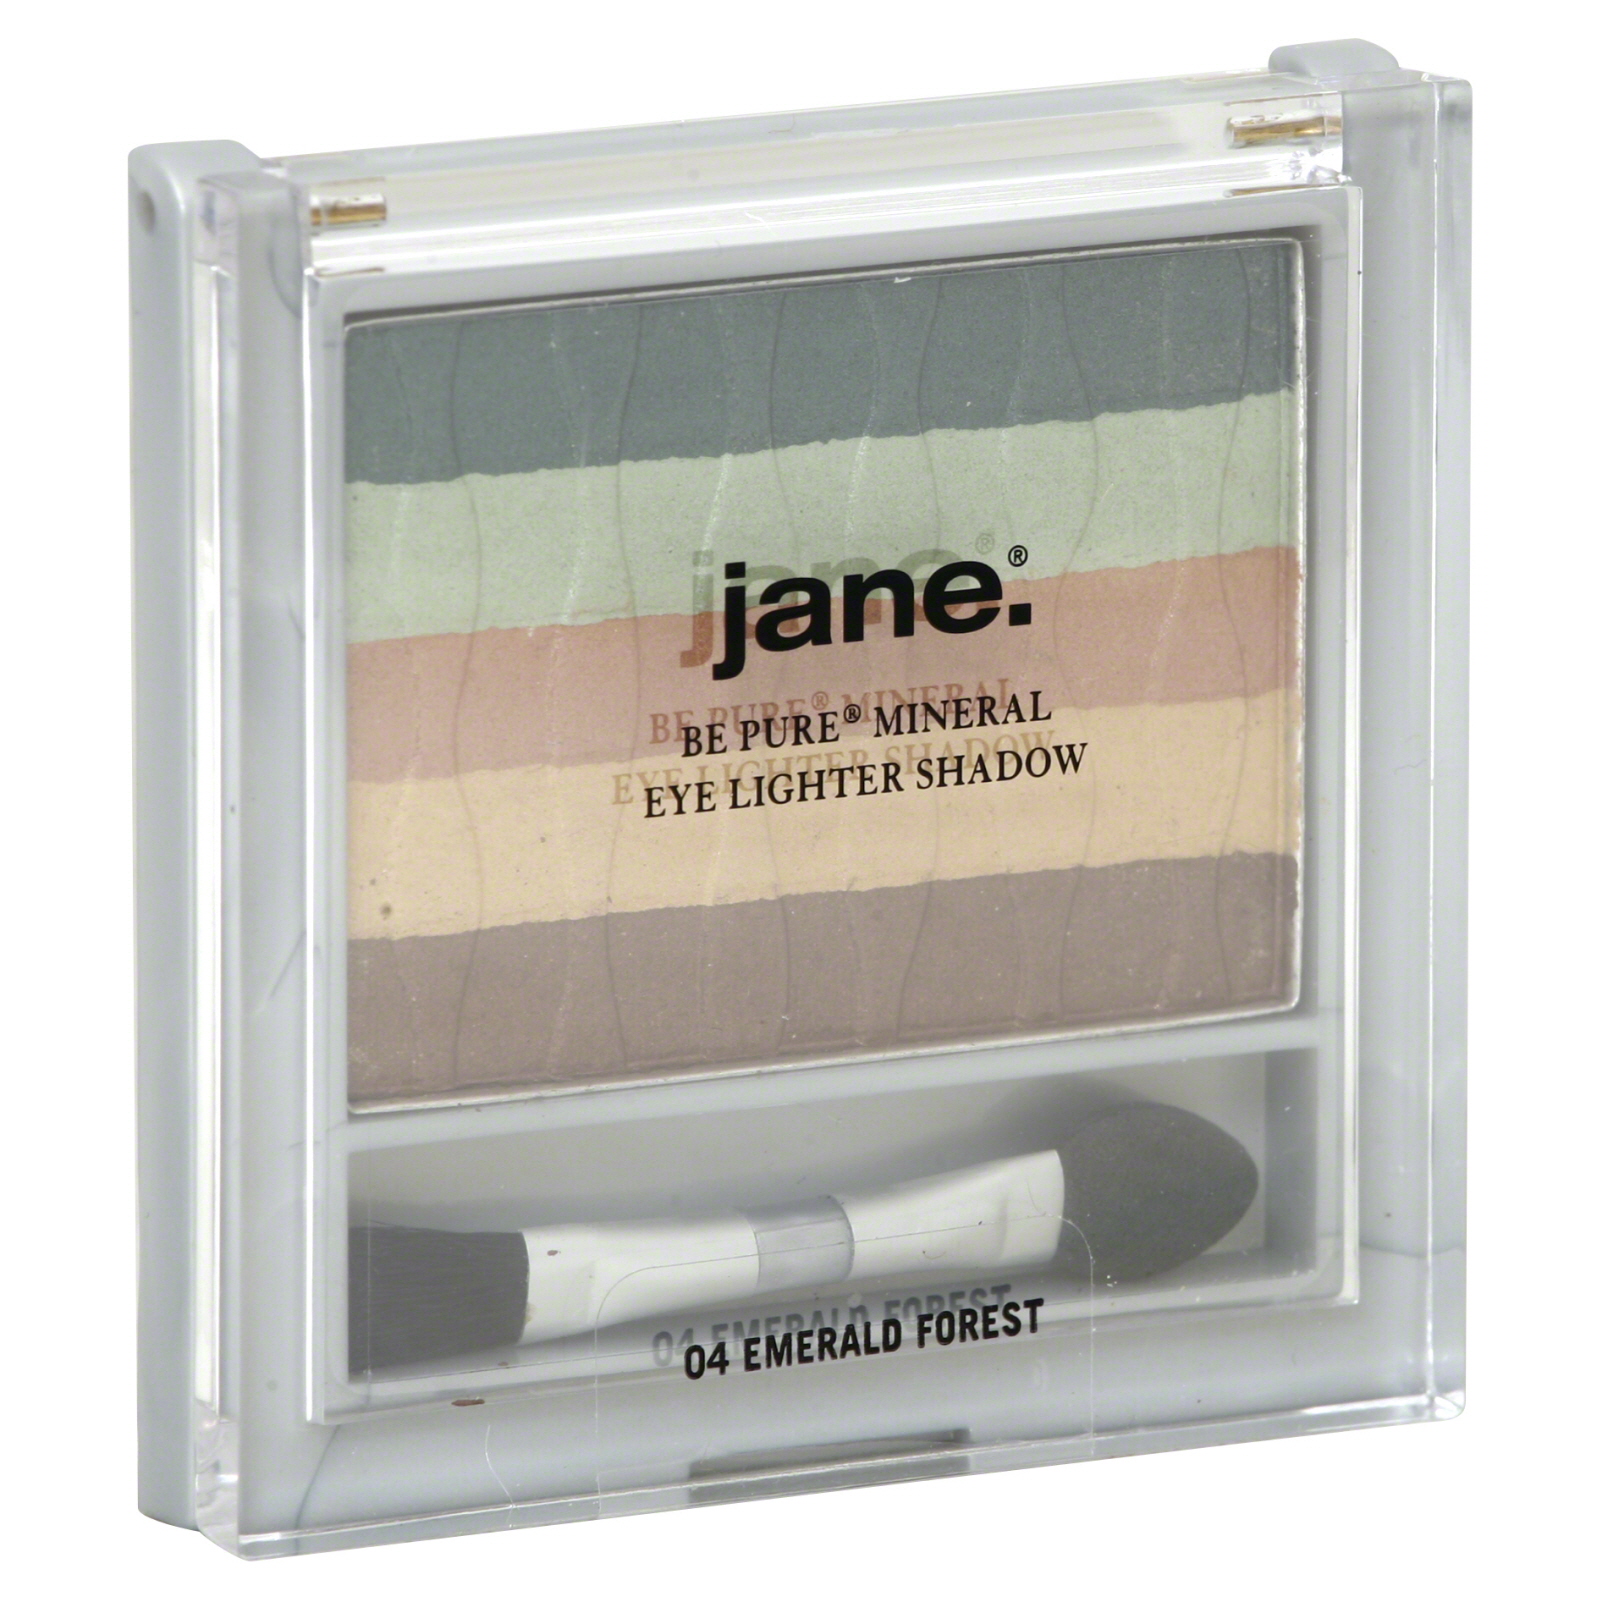 Jane Be Pure Mineral Eye Lighter Shadow Multiples